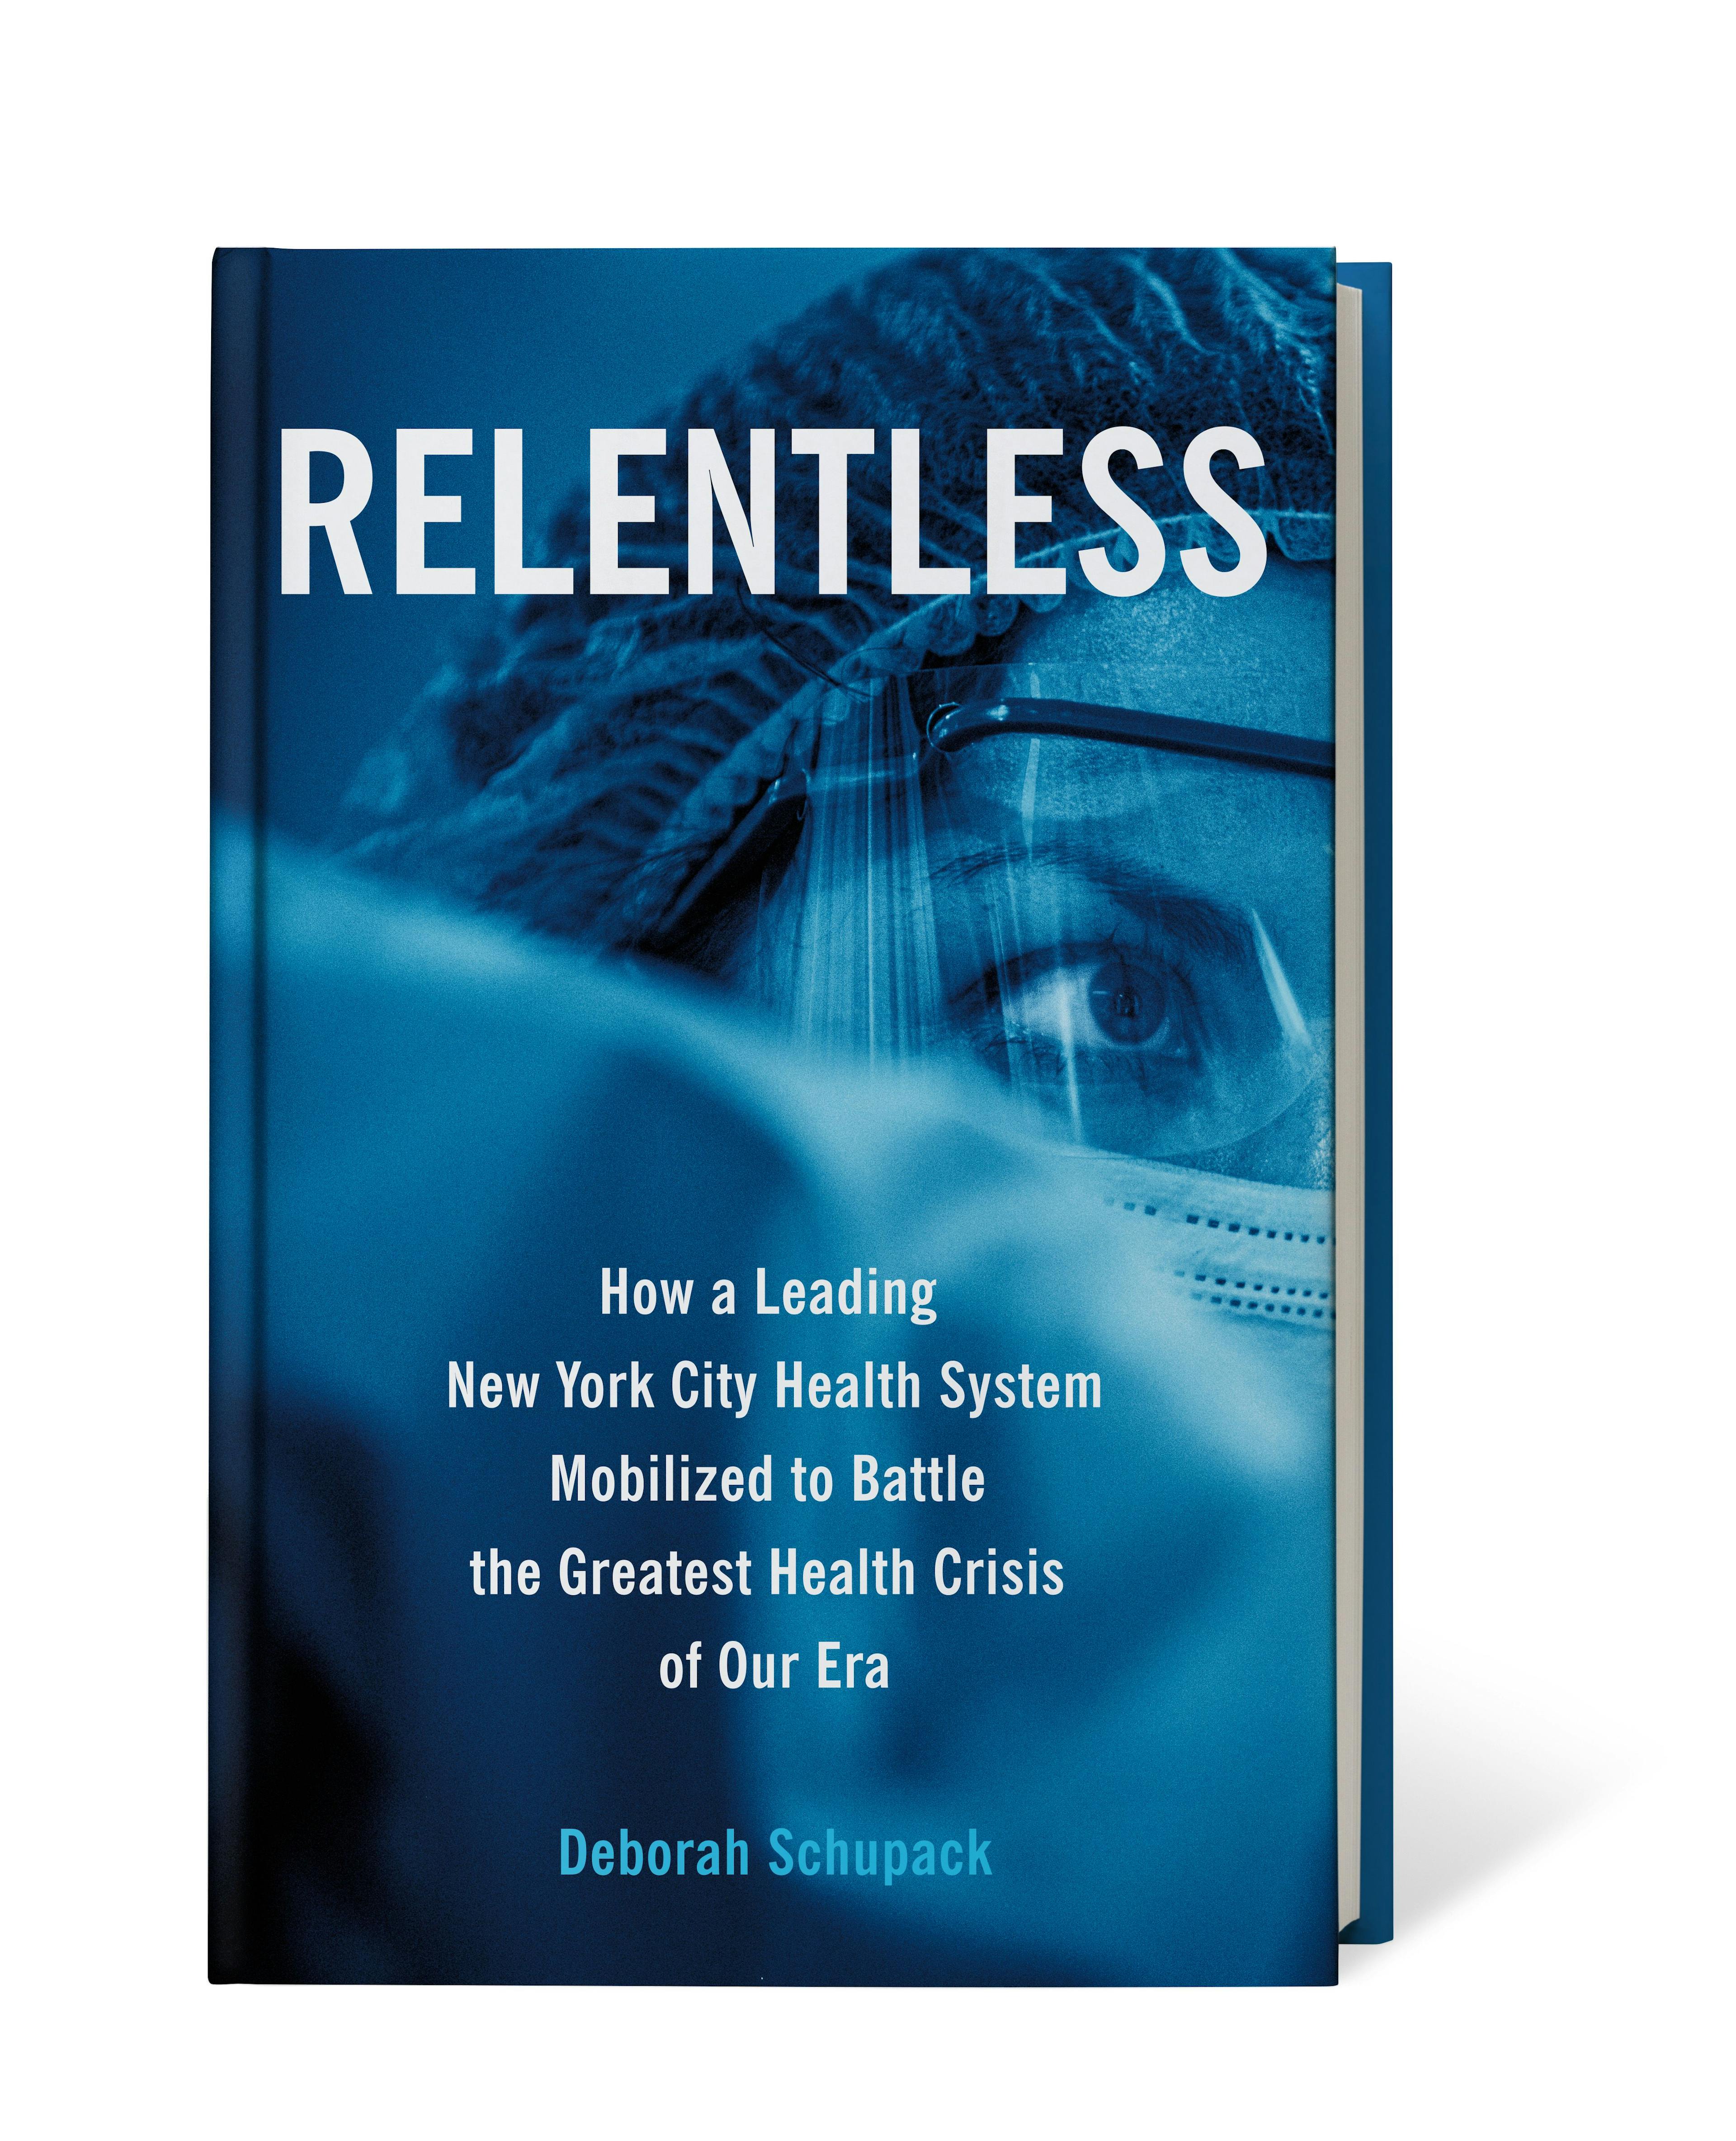 Journalist Deborah Schupack chronicled Mount Sinai's battle with COVID-19 in the new book, “Relentless: How a Leading New York City Health System Mobilized to Battle the Greatest Health Crisis of Our Era.”